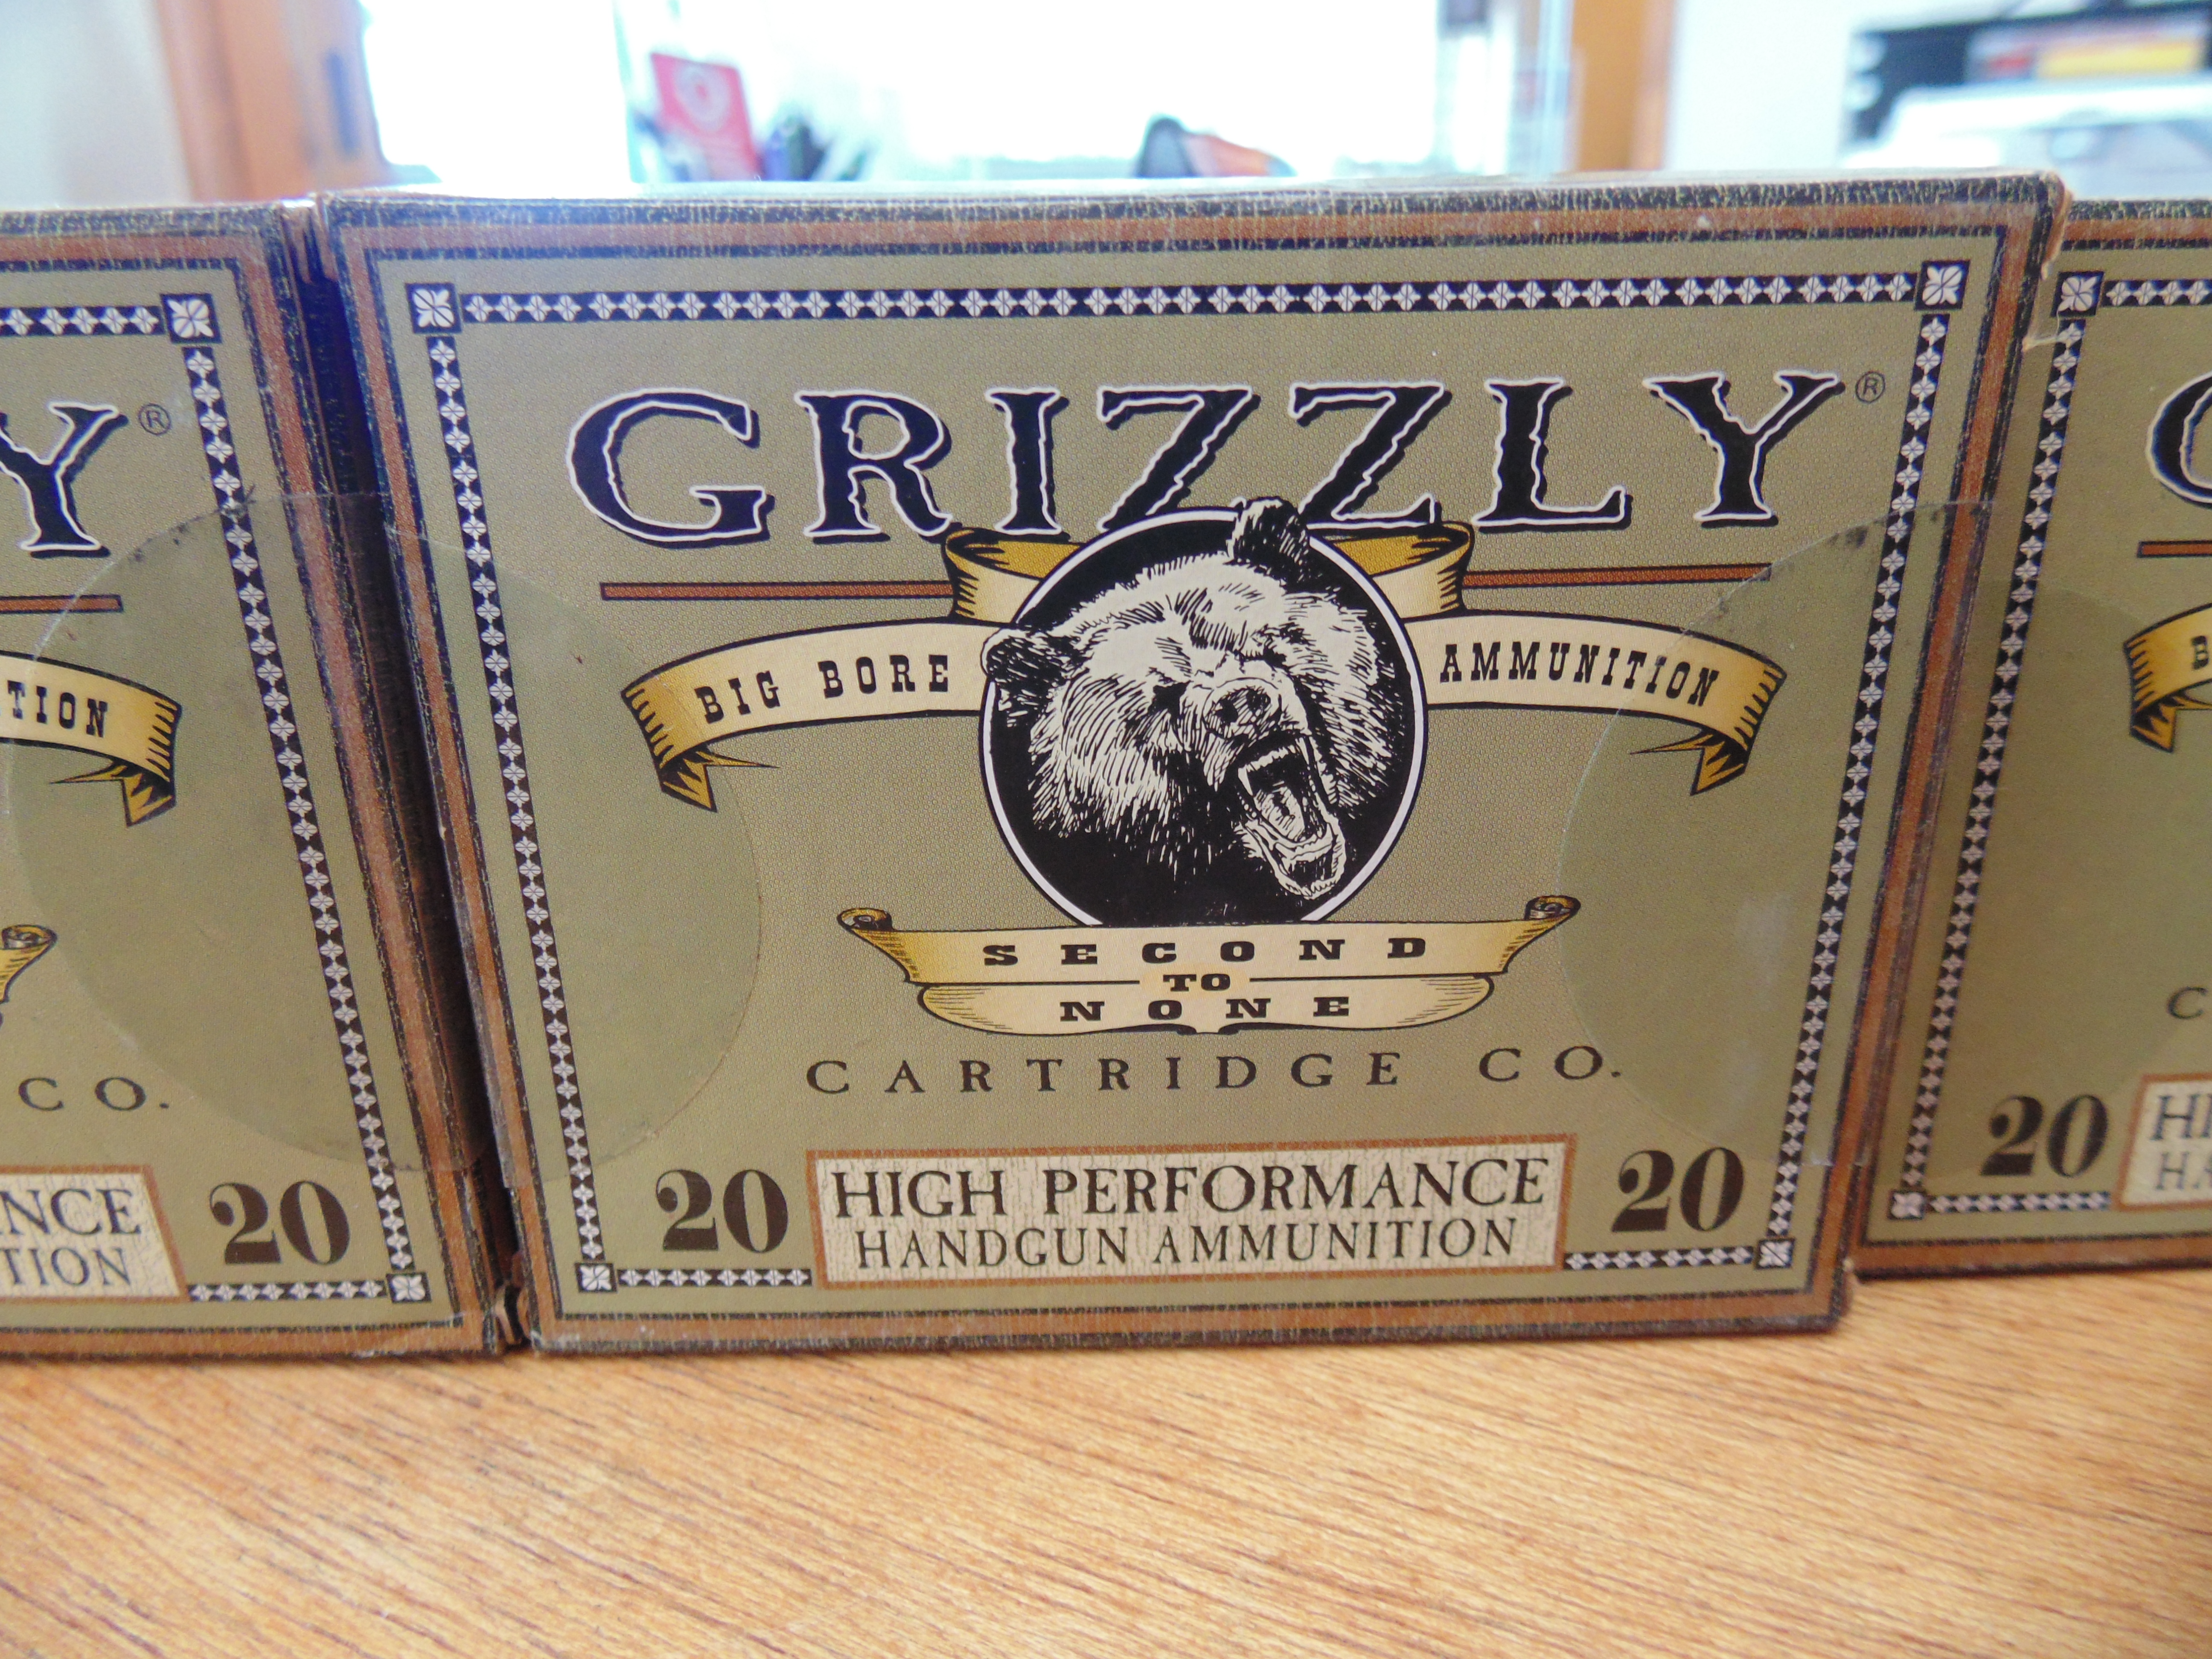 100 Rounds of Grizzly 45 Long Colt 265gr - Montana Gun Trader